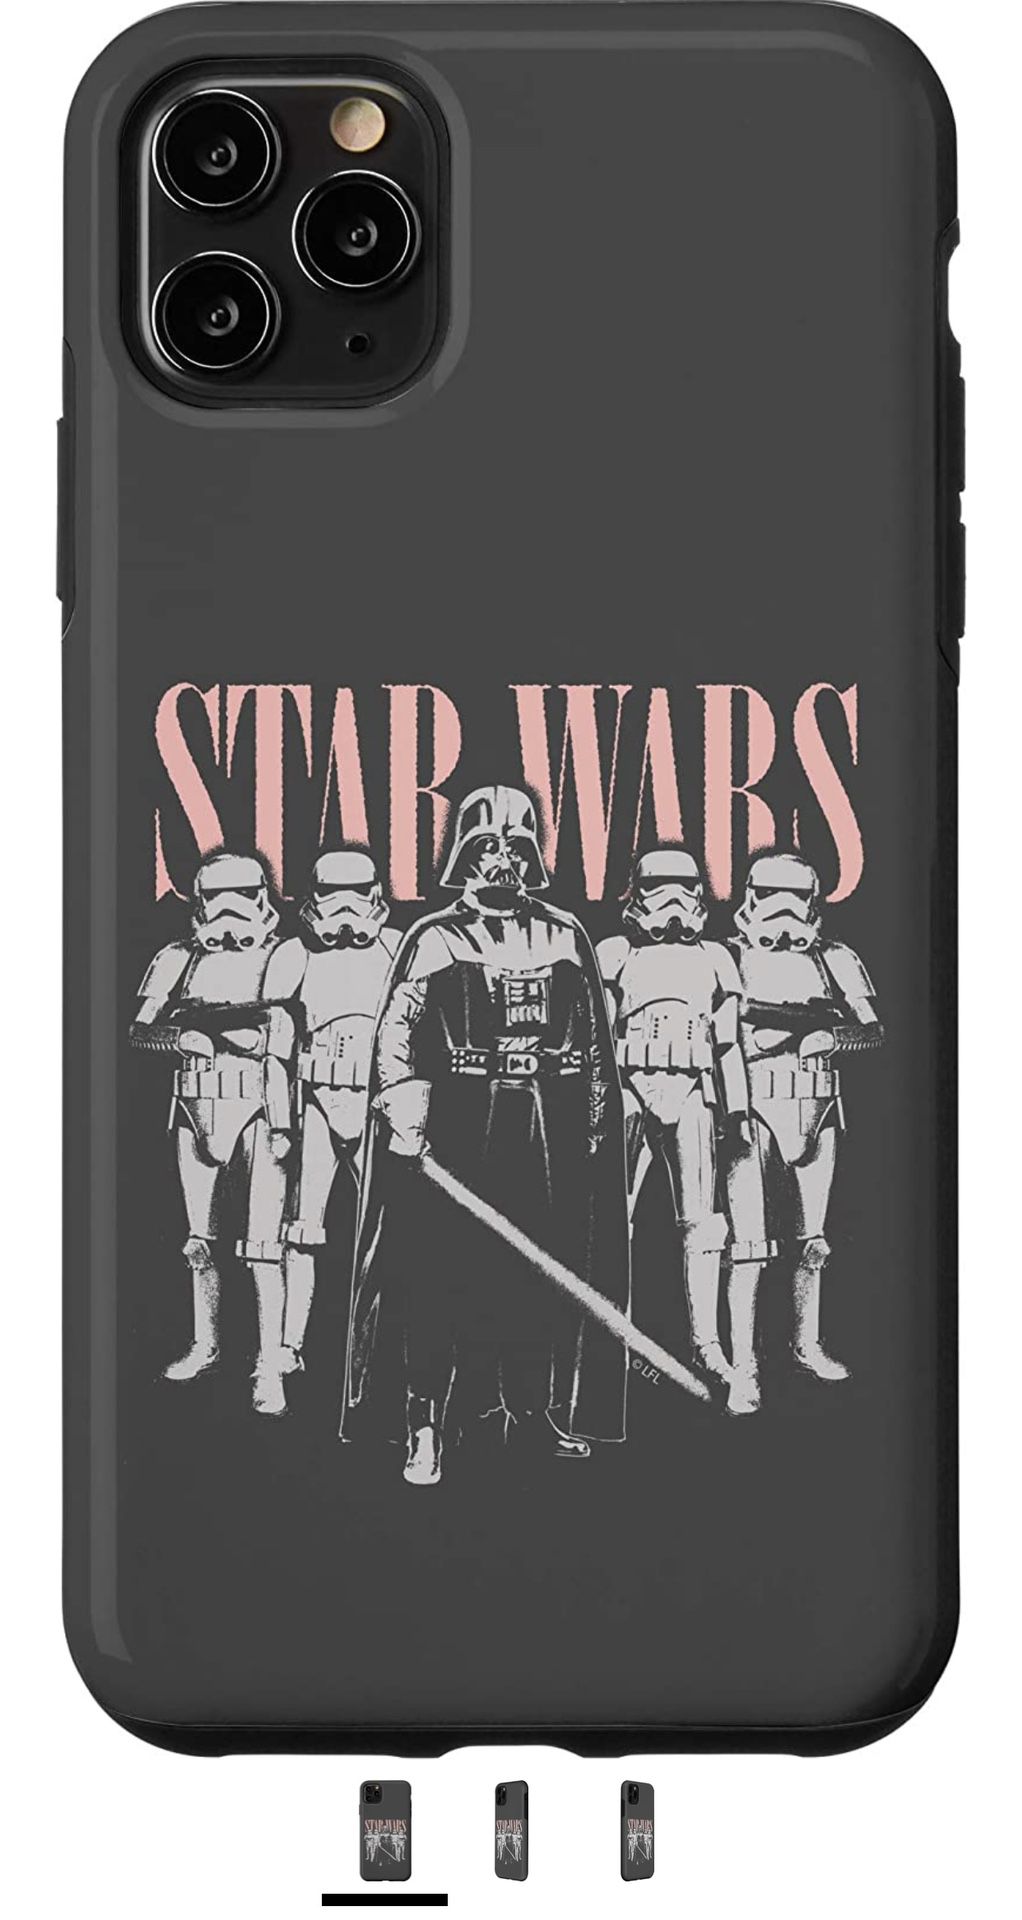 Star Wars Darth Vader And Stormtroopers iPhone 11 Pro Max Case